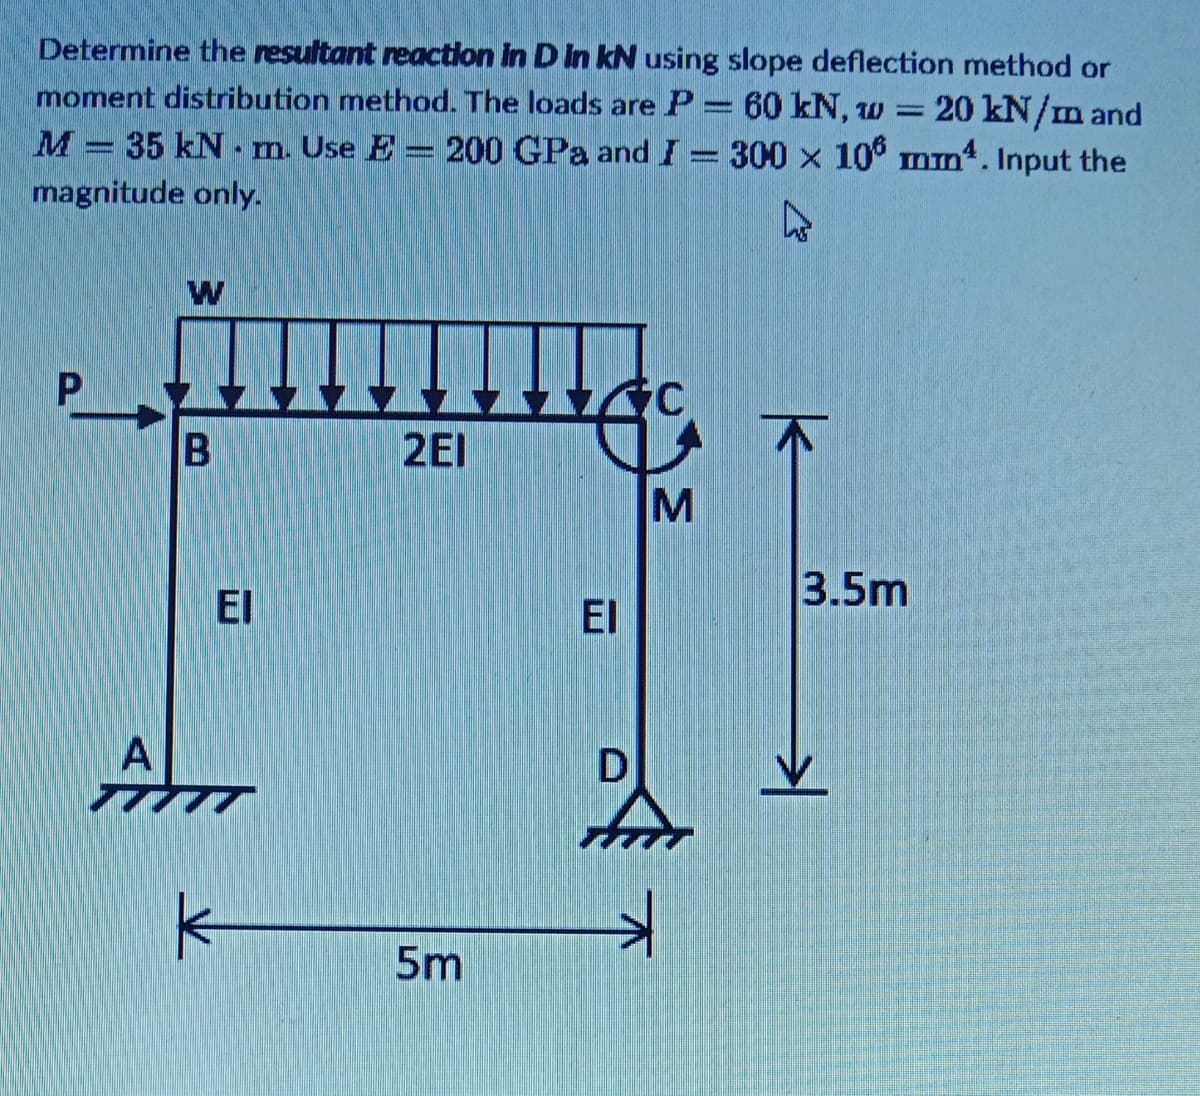 Determine the resultant reaction in D In kN using slope deflection method or
moment distribution method. The loads are P= 60 kN, w =
20 kN/m and
M = 35 kN m. Use E = 200 GPa and I = 300 x 10 mm. Input the
magnitude only.
2EI
M
3.5m
El
El
D
5m
